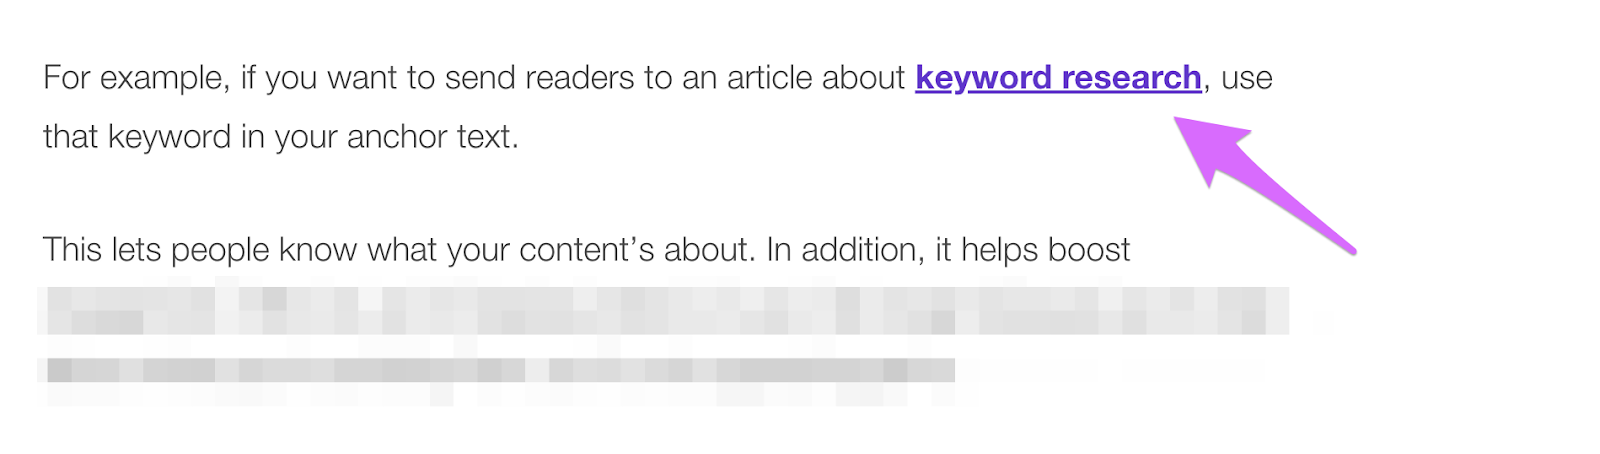 keyword anchor text placement